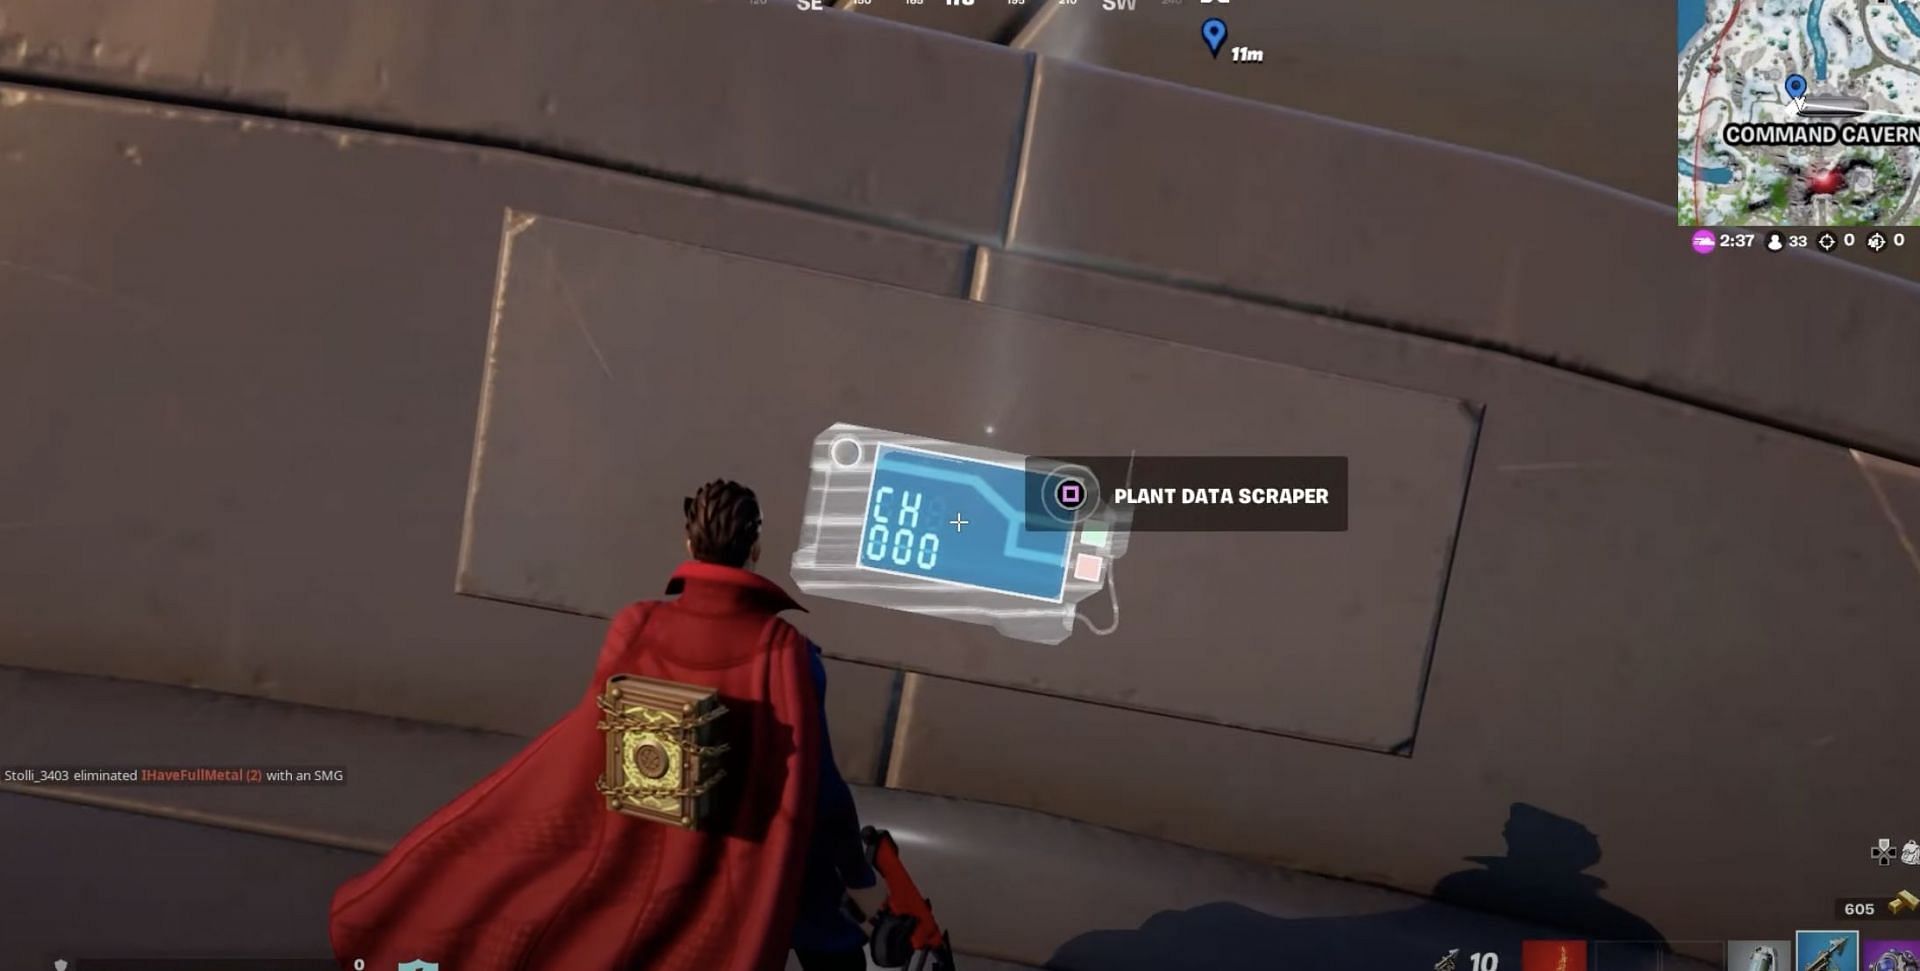 Planting the Data Scraper on an IO Airship in Fortnite (Image via Perfect Score/YT)